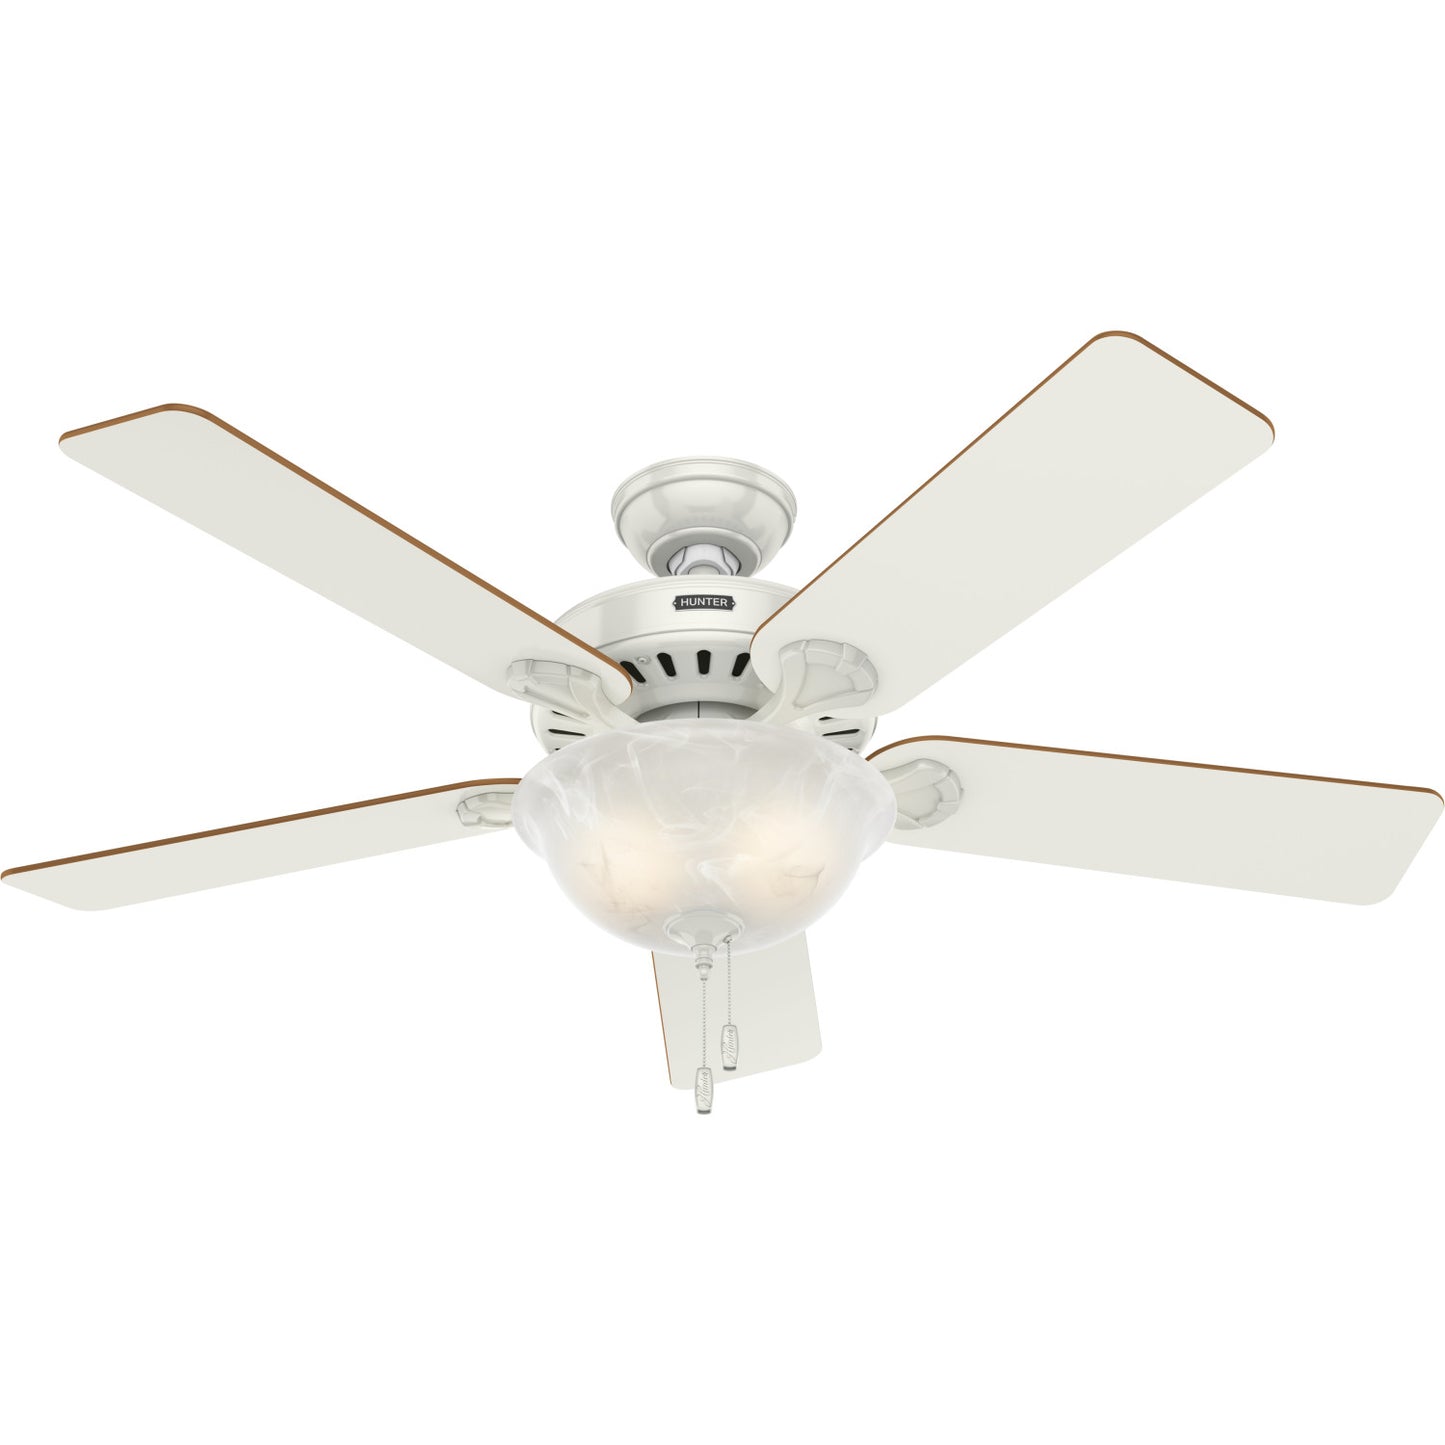 Pro's Best with Light 52 inch Ceiling Fans Hunter White - White 